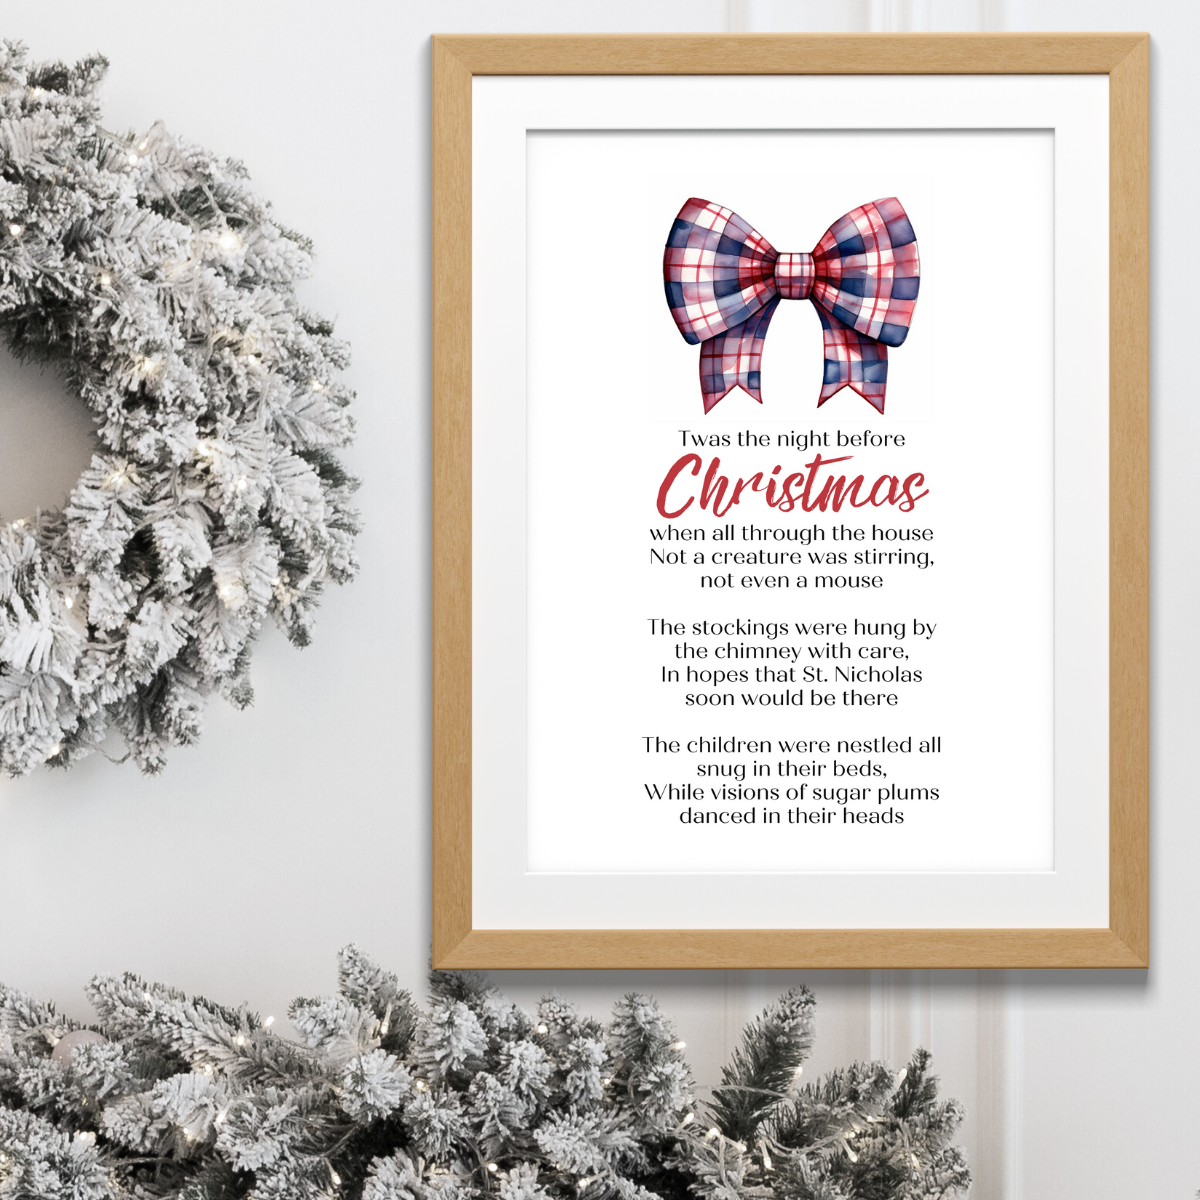 Twas the Night Before Christmas Printable Poster poem in black frame next to pretty festive tree for Christmas home Decor in classic Navy Red Tarten Check  Bow Design